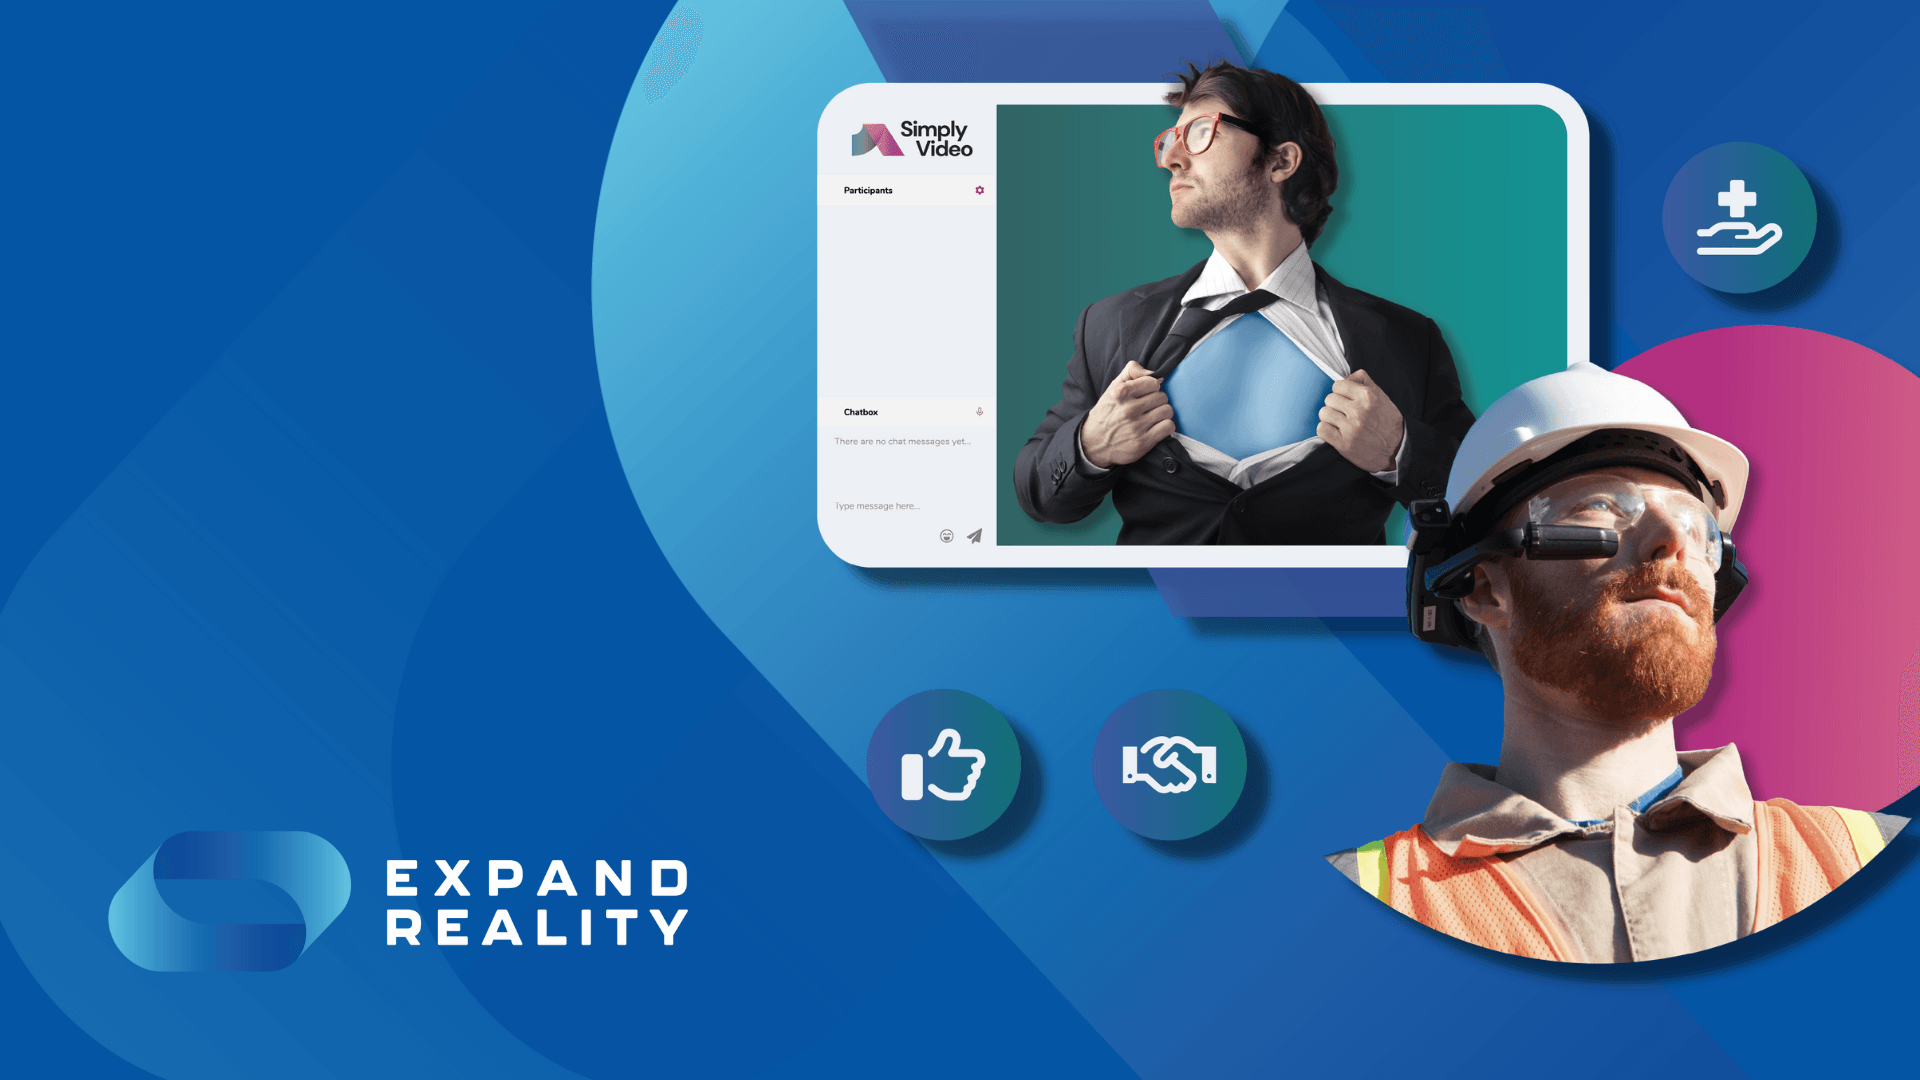 SimplyVideo is a video conferencing application designed for XR devices. Read on to learn how it can work seamlessly with essential business software.